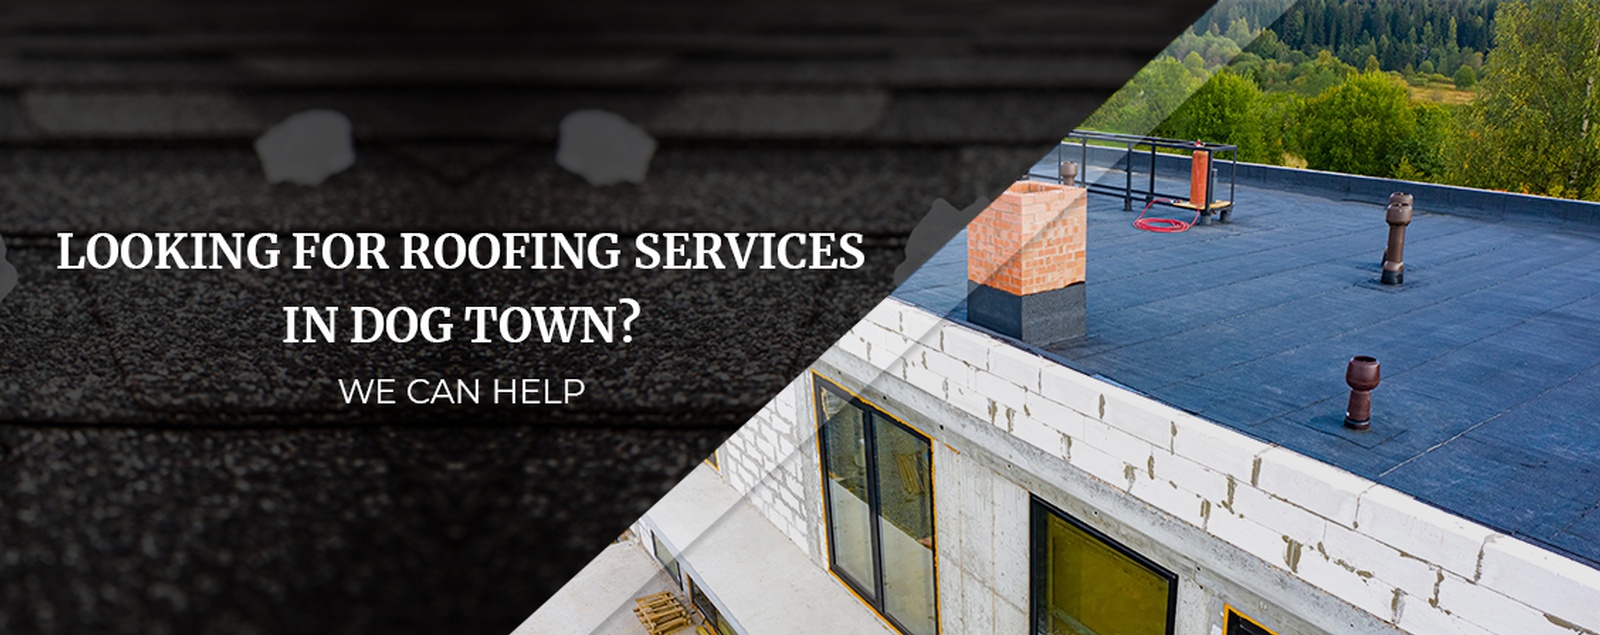 Looking For Roofing Services In Dog Town We Can Help